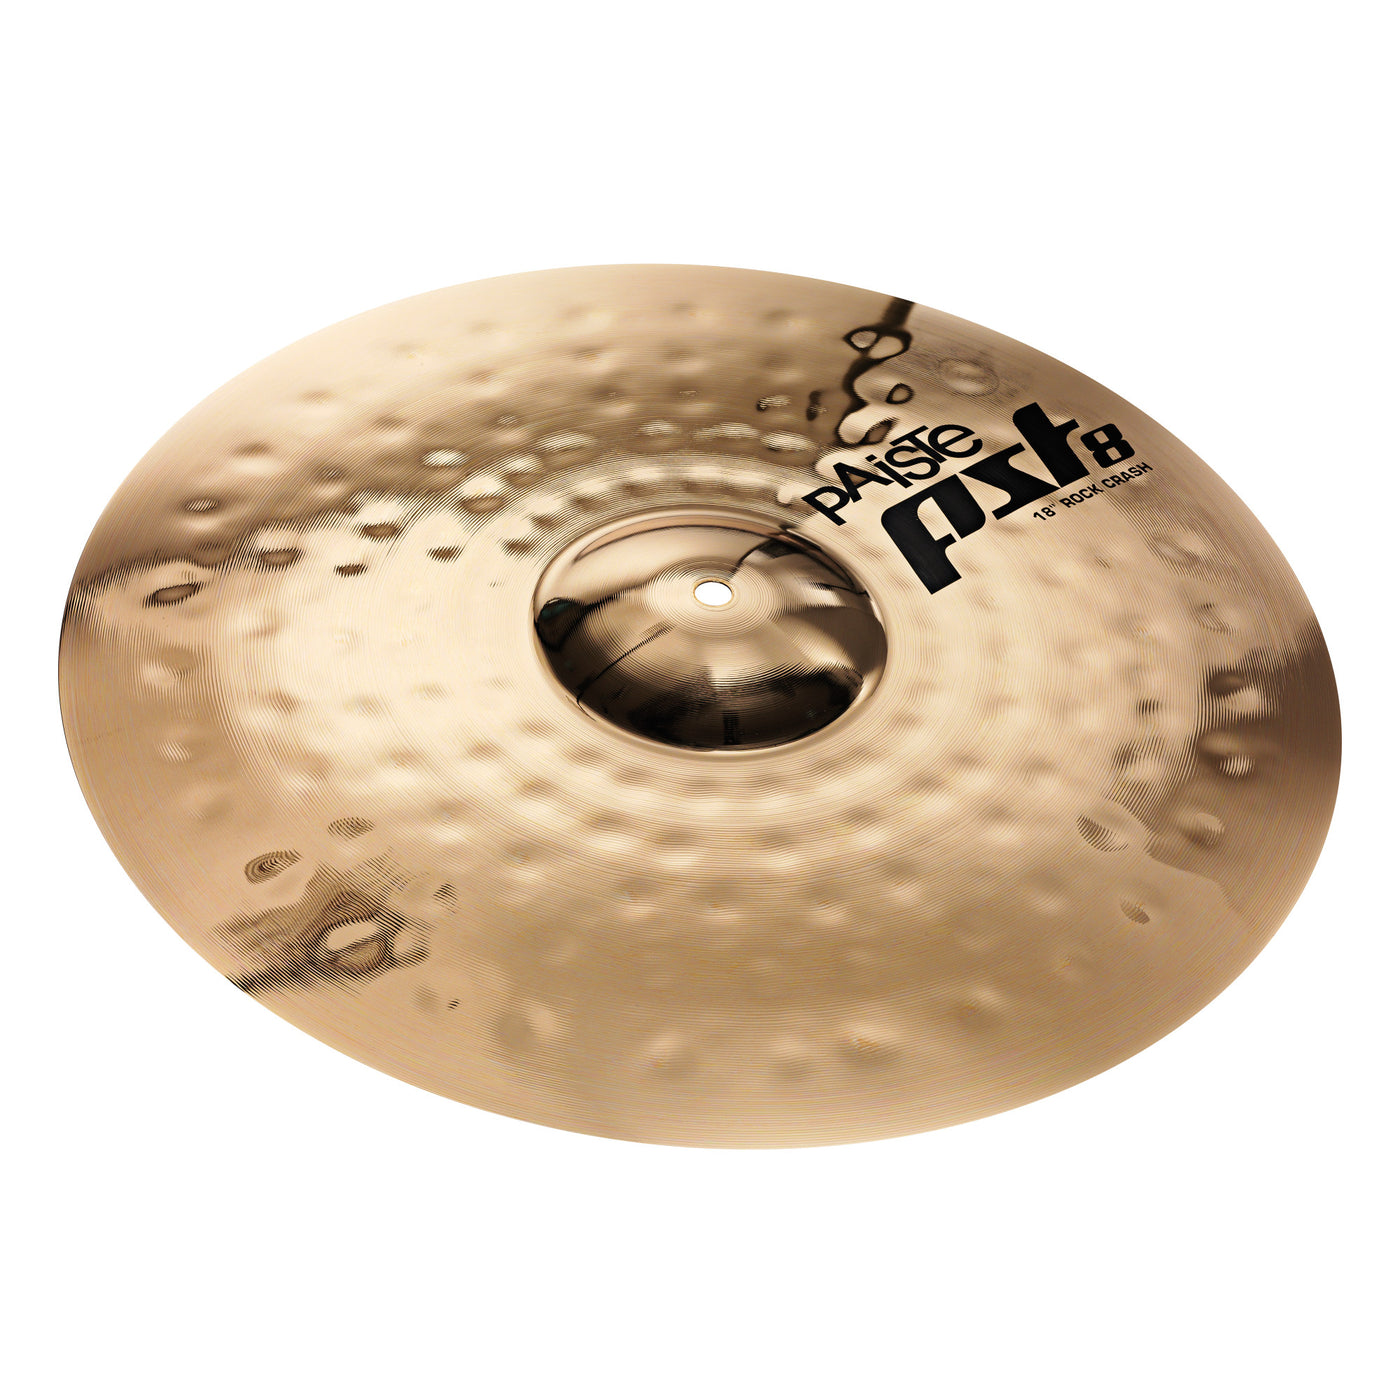 Paiste Reflector Rock Crash Cymbal, PST 8 Series, Percussion Instrument for Drums, 18"